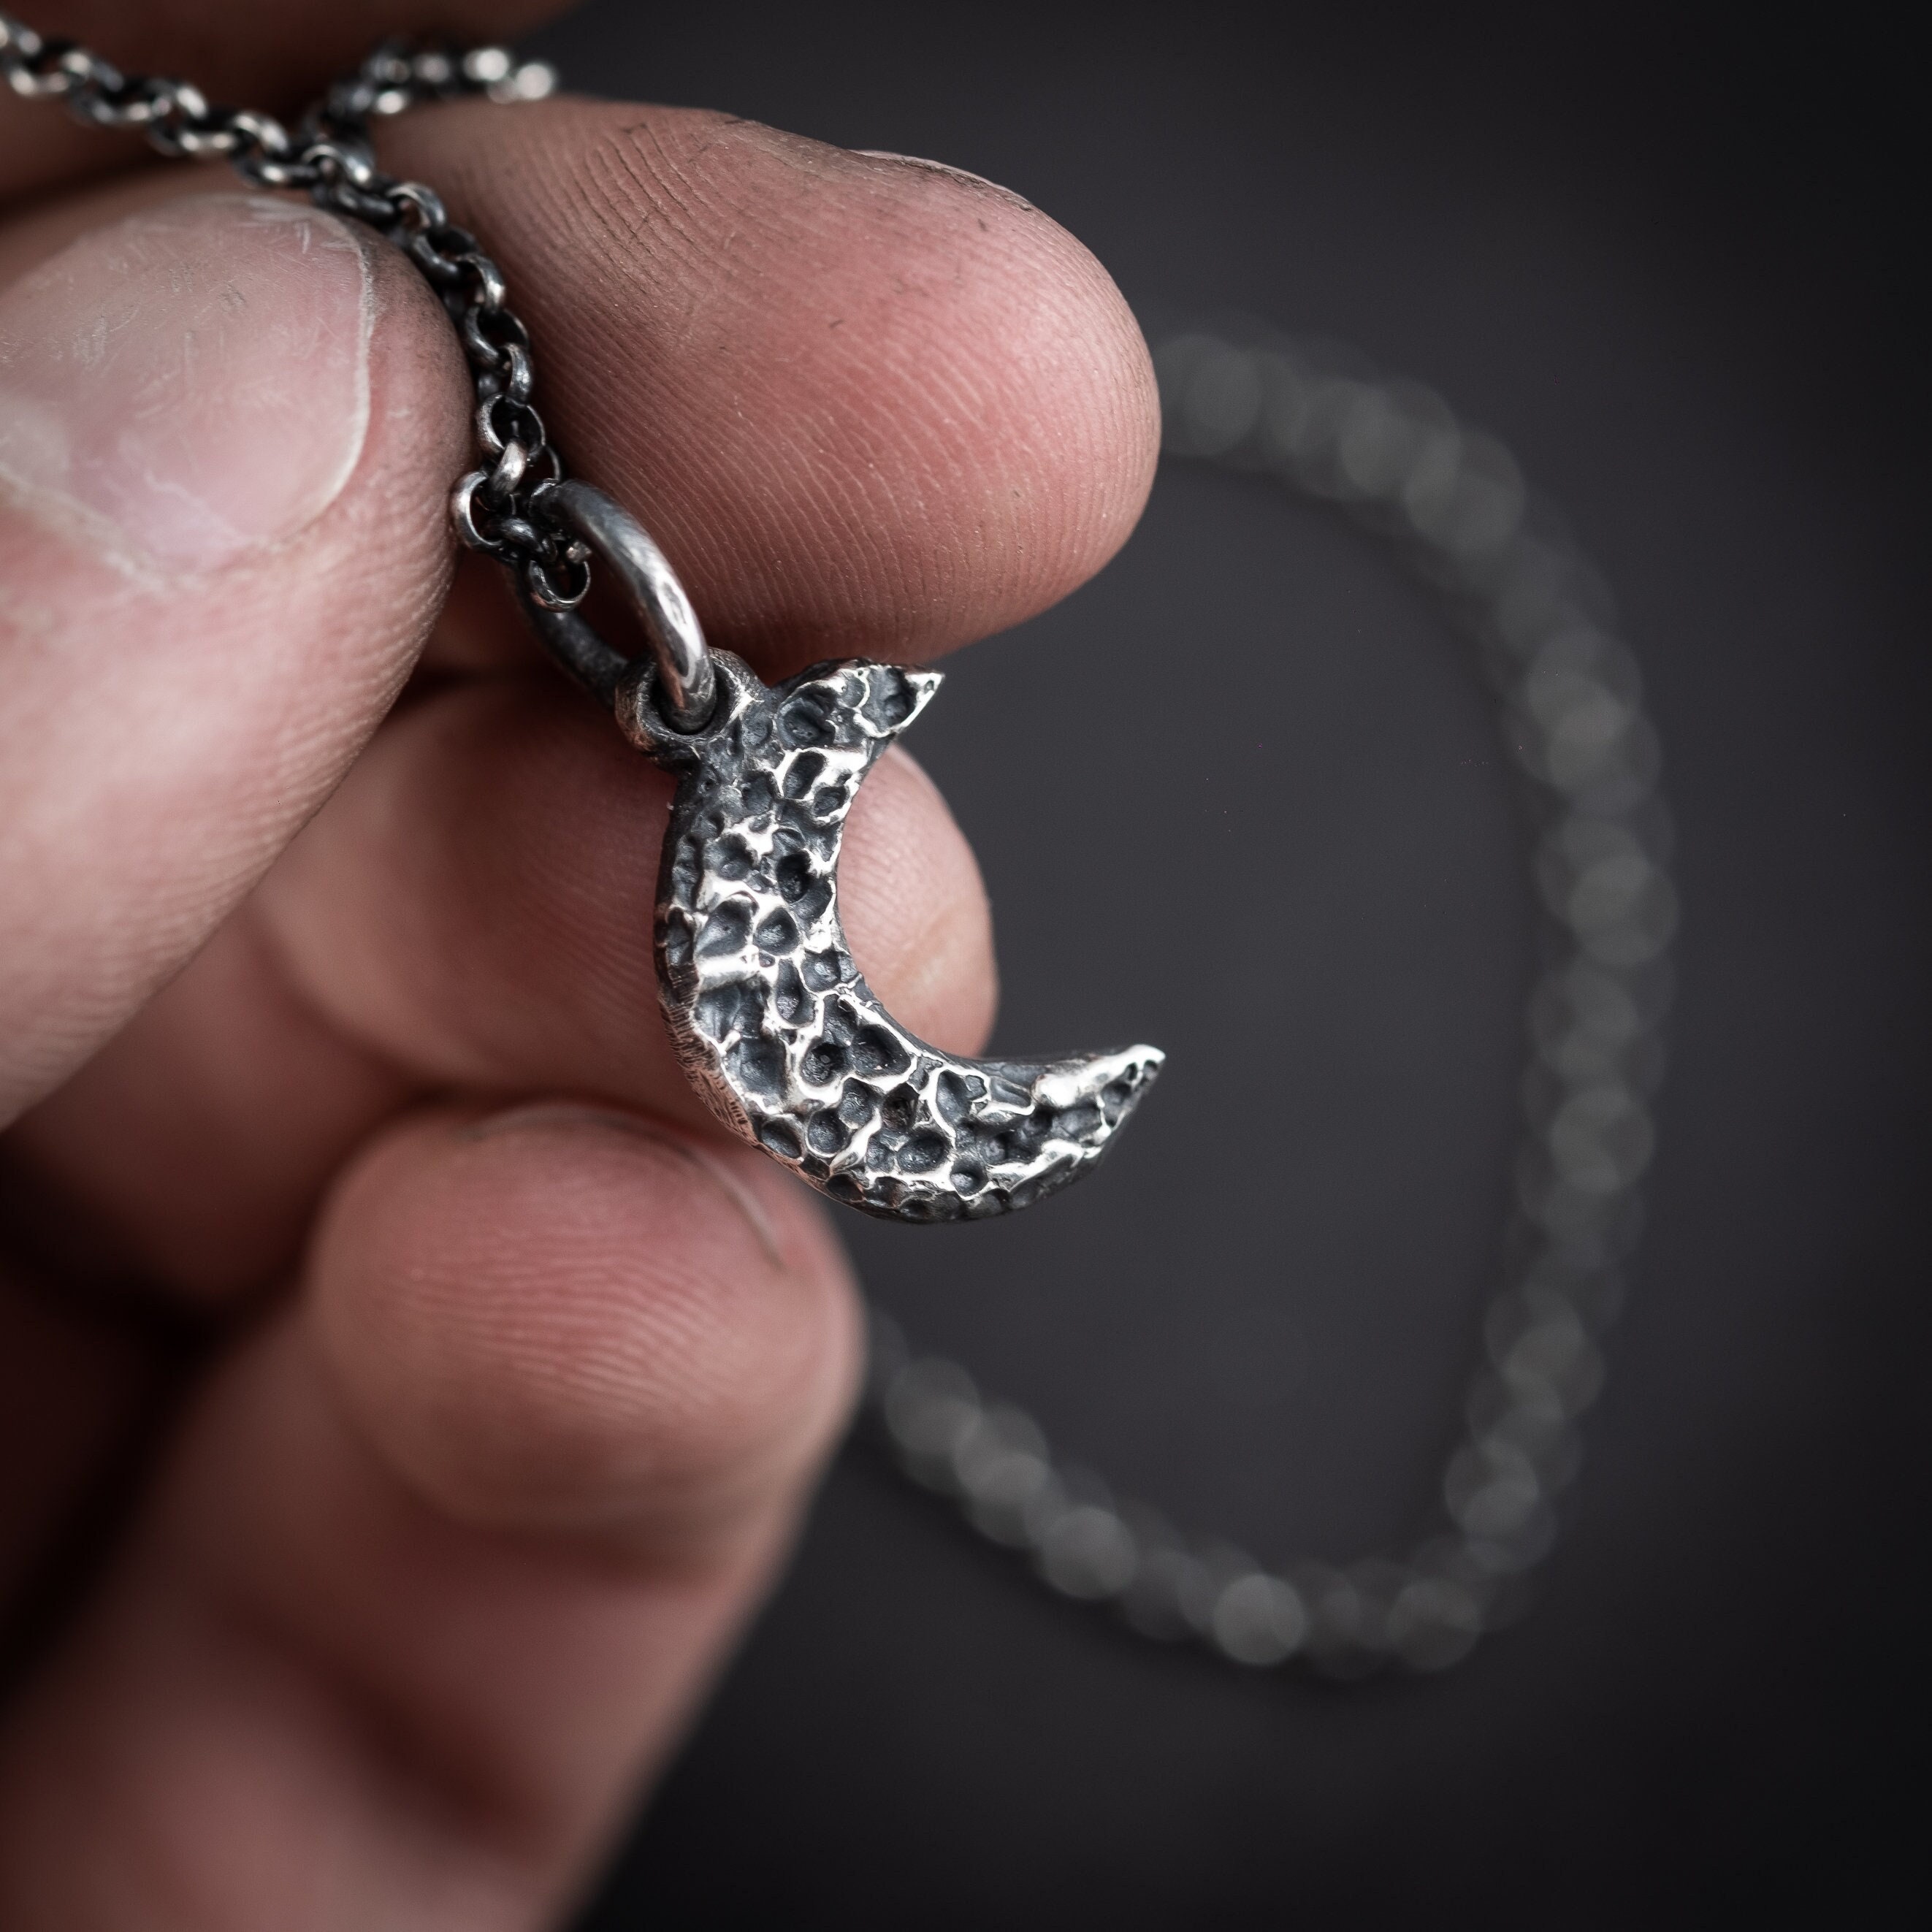 925 sterling silver unique half moon pendant amazing delicate silver jewelry  for both men and women nsp651 | TRIBAL ORNAMENTS